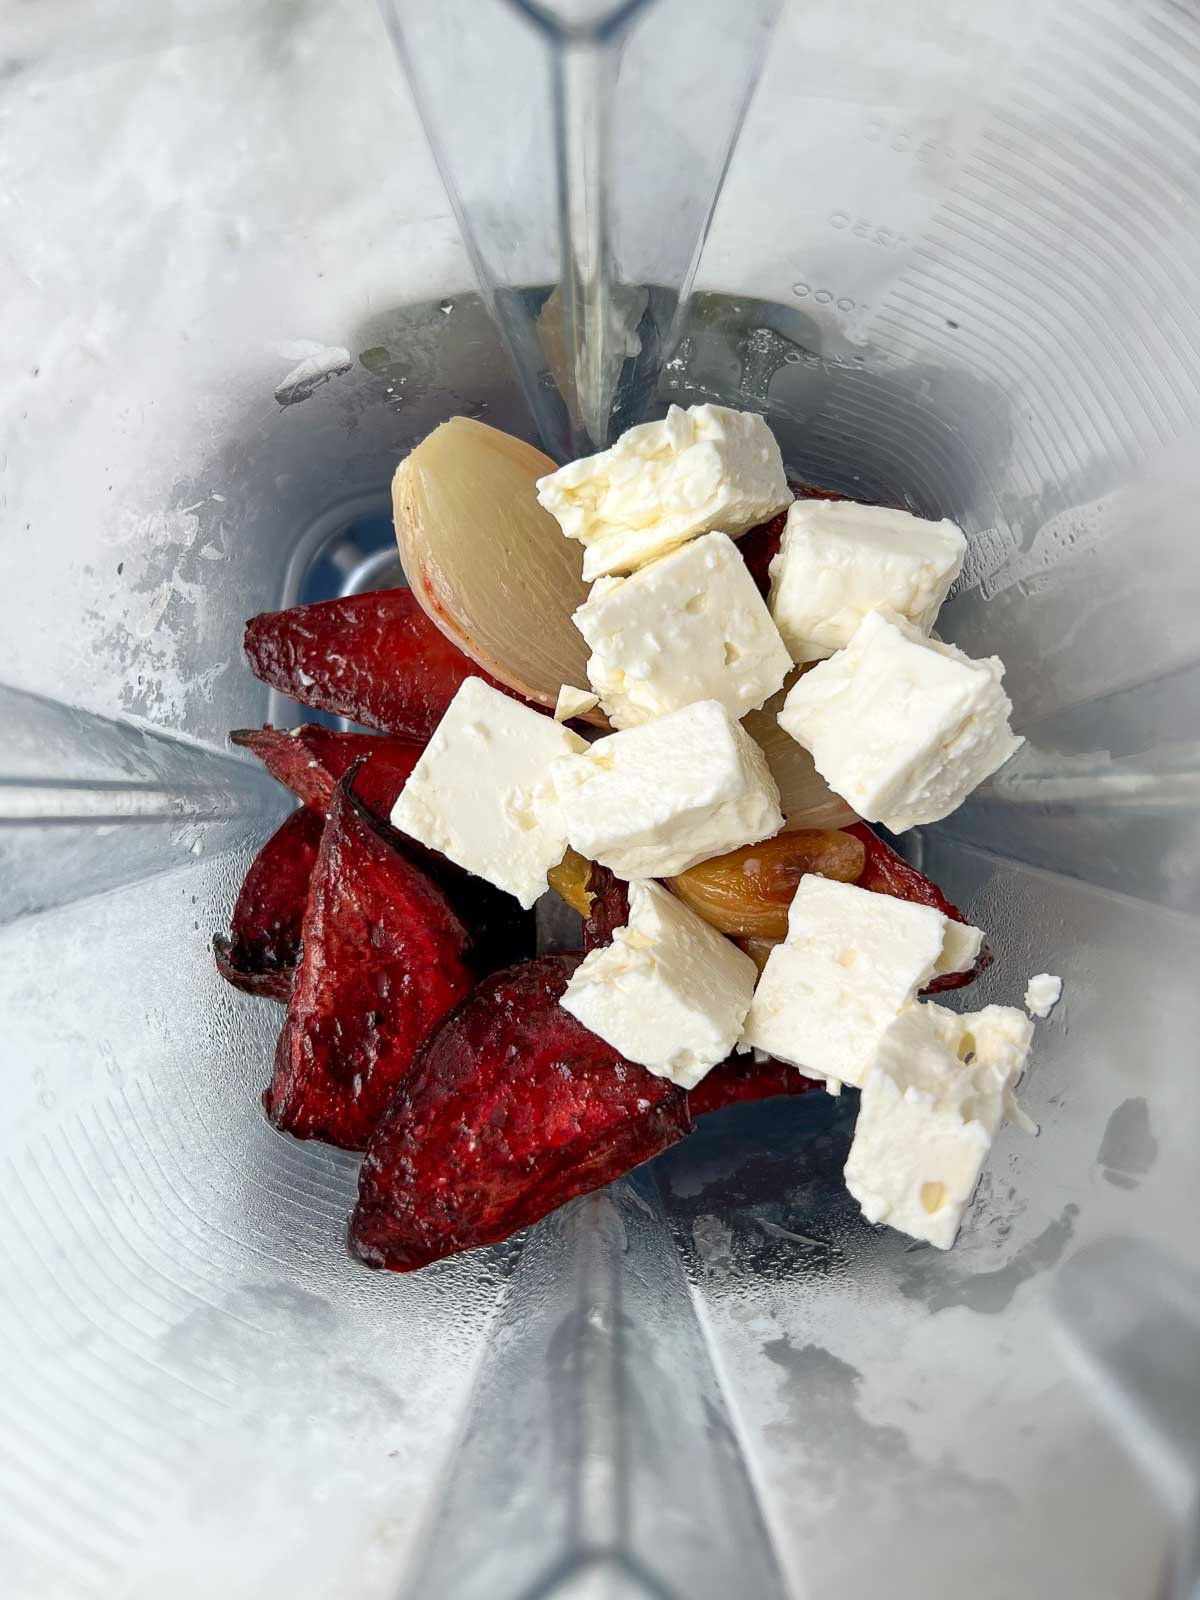 Roasted beets, roasted shallot, roasted garlic, and feta in a blender.